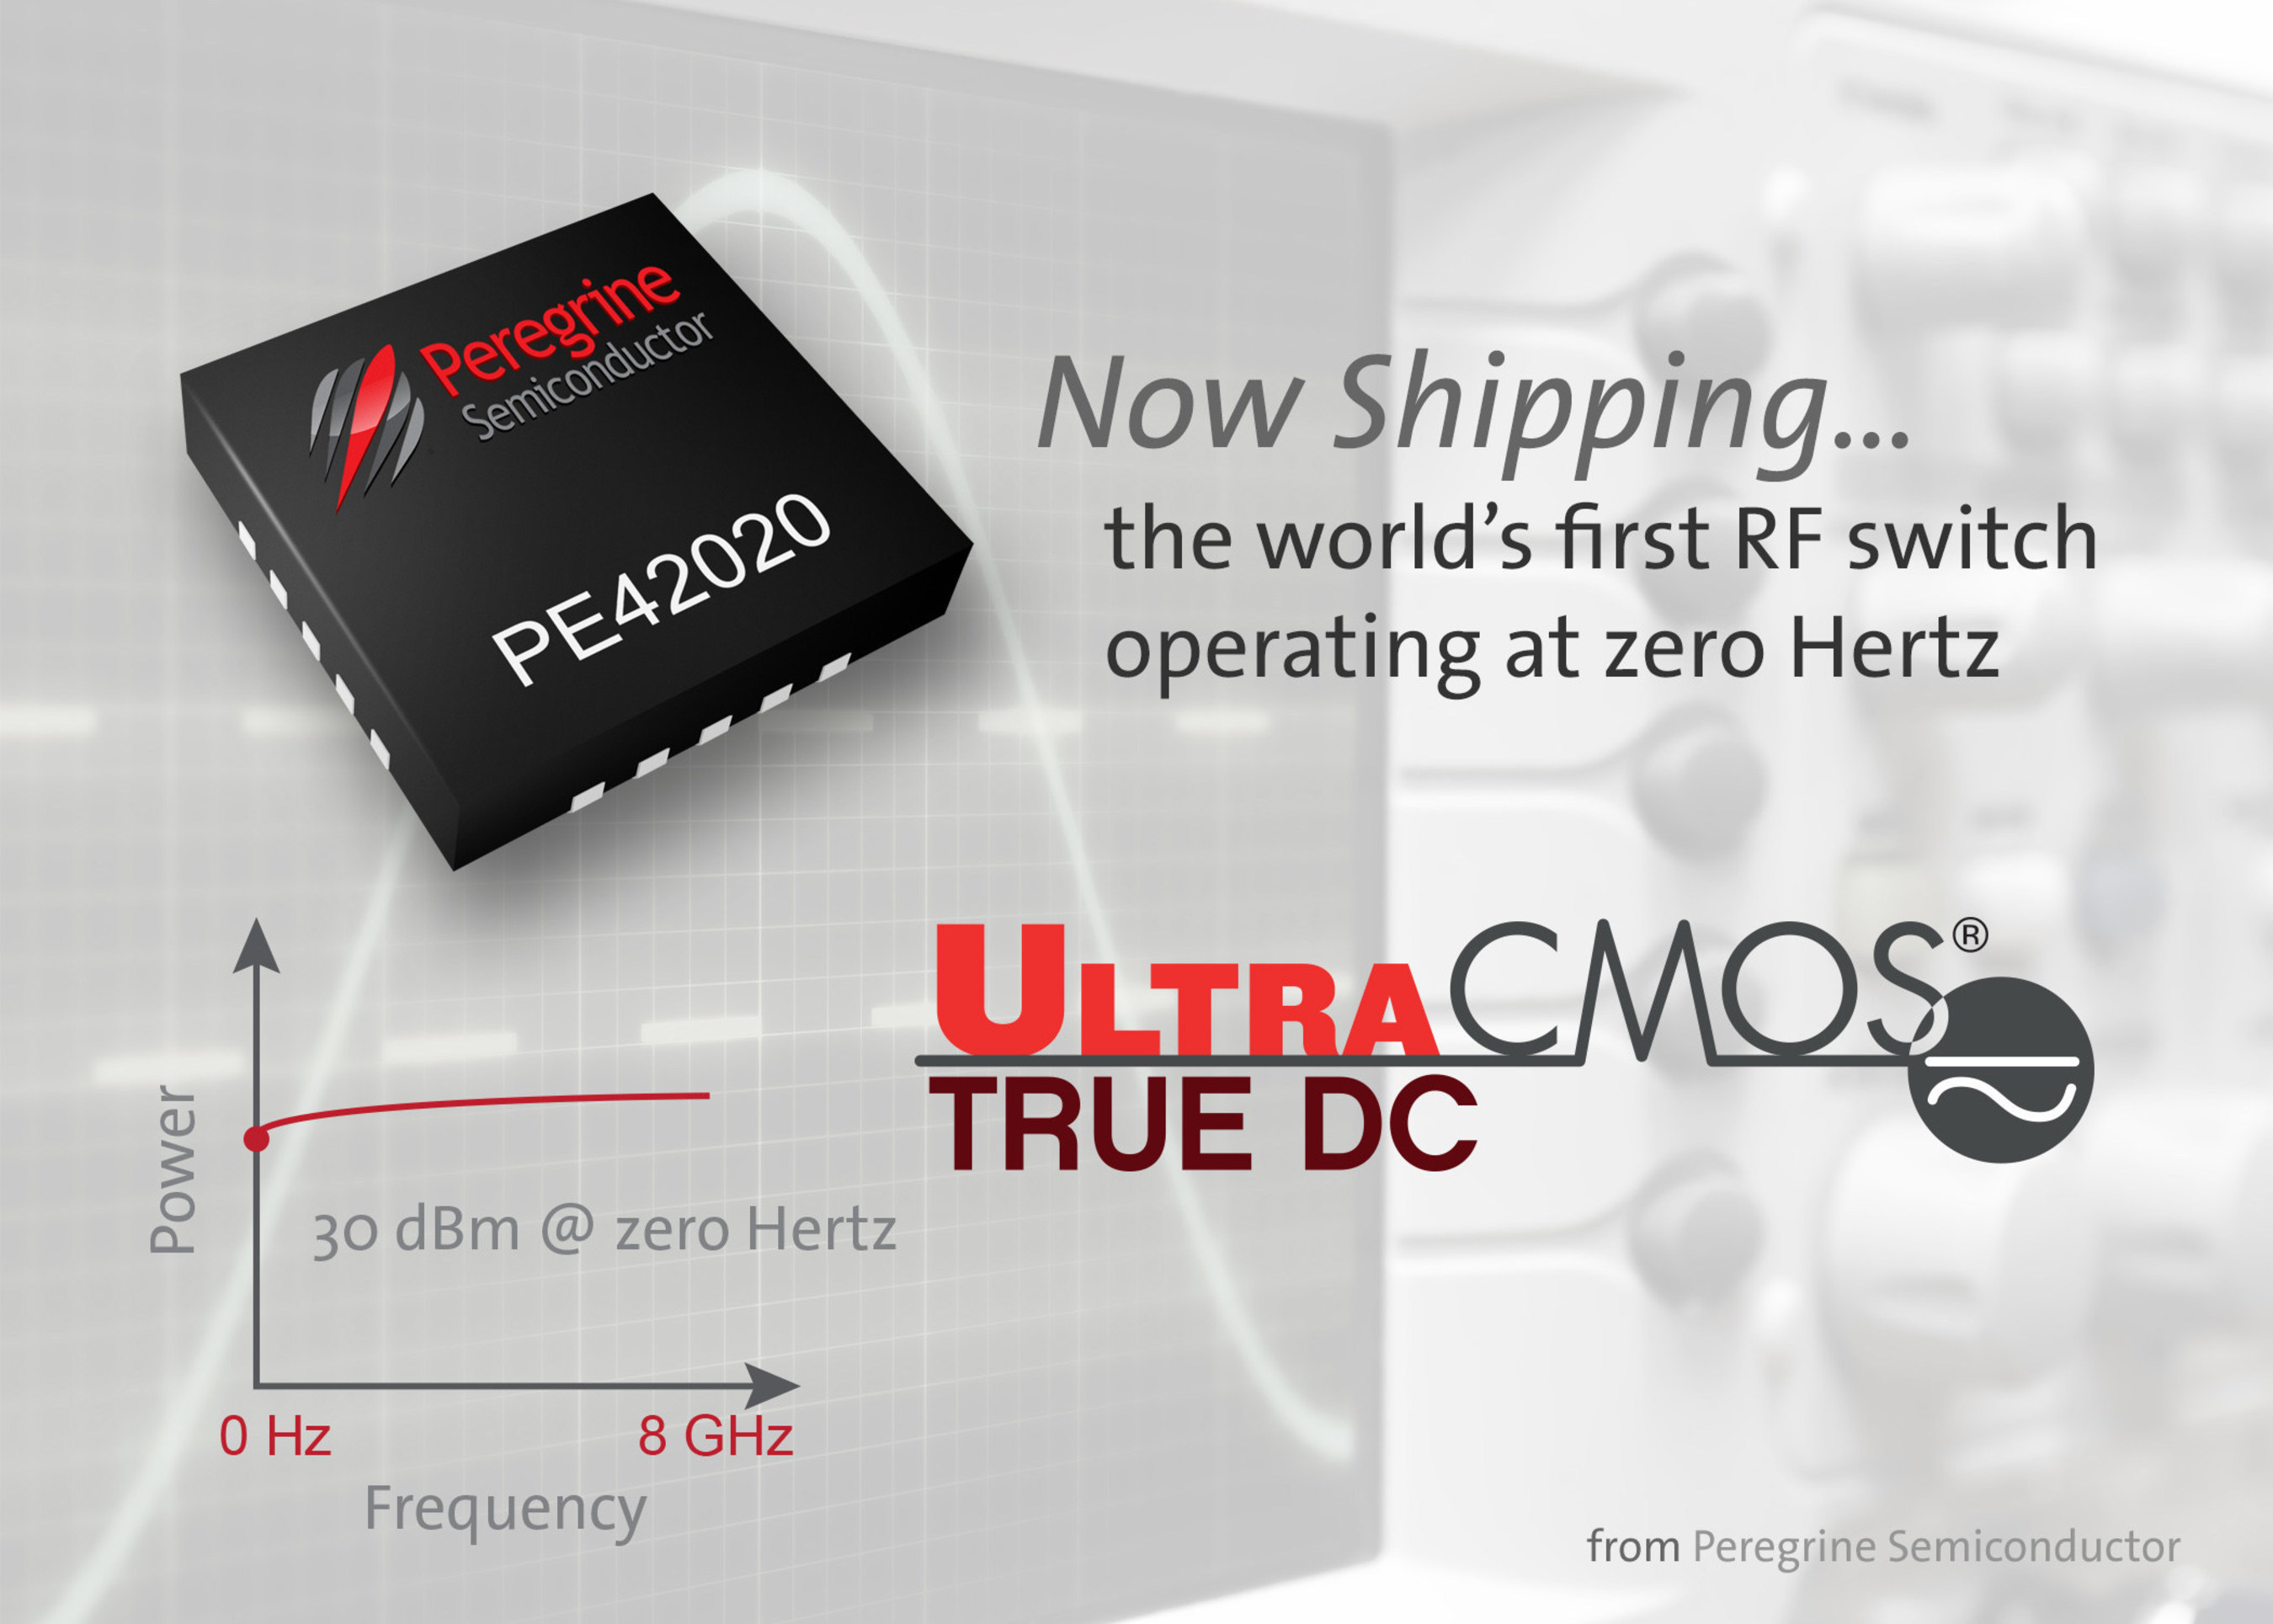 Peregrine Semiconductor announces the availability of the UltraCMOS(R) PE42020. This RF switch integrates RF, digital and analog functions in a monolithic die to preserve signal integrity from DC to 8 GHz.